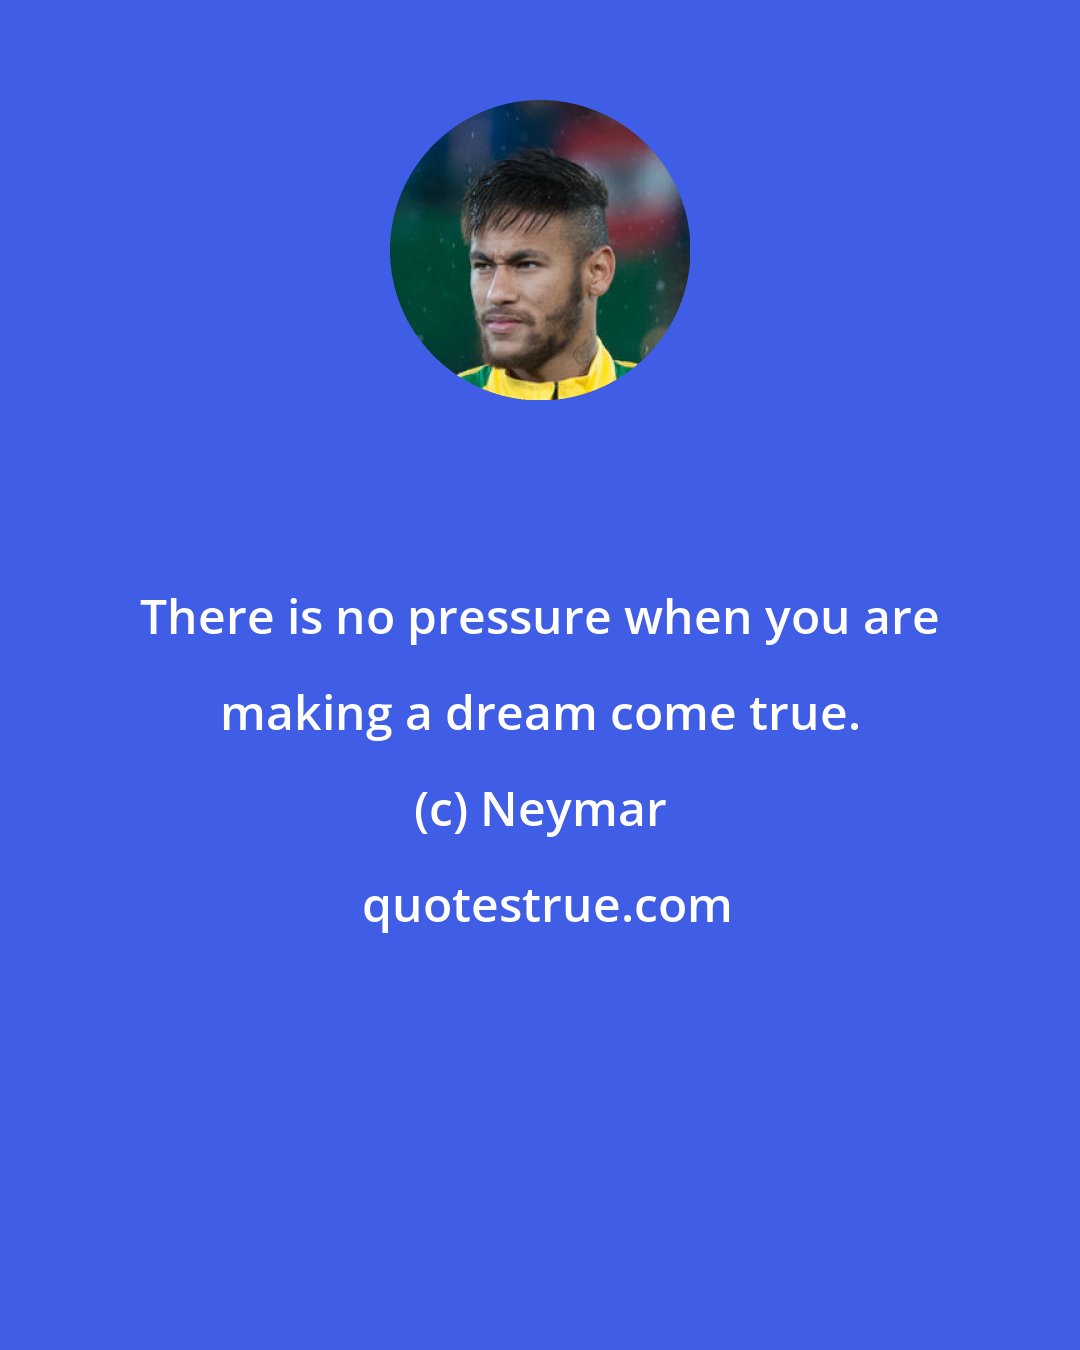 Neymar: There is no pressure when you are making a dream come true.